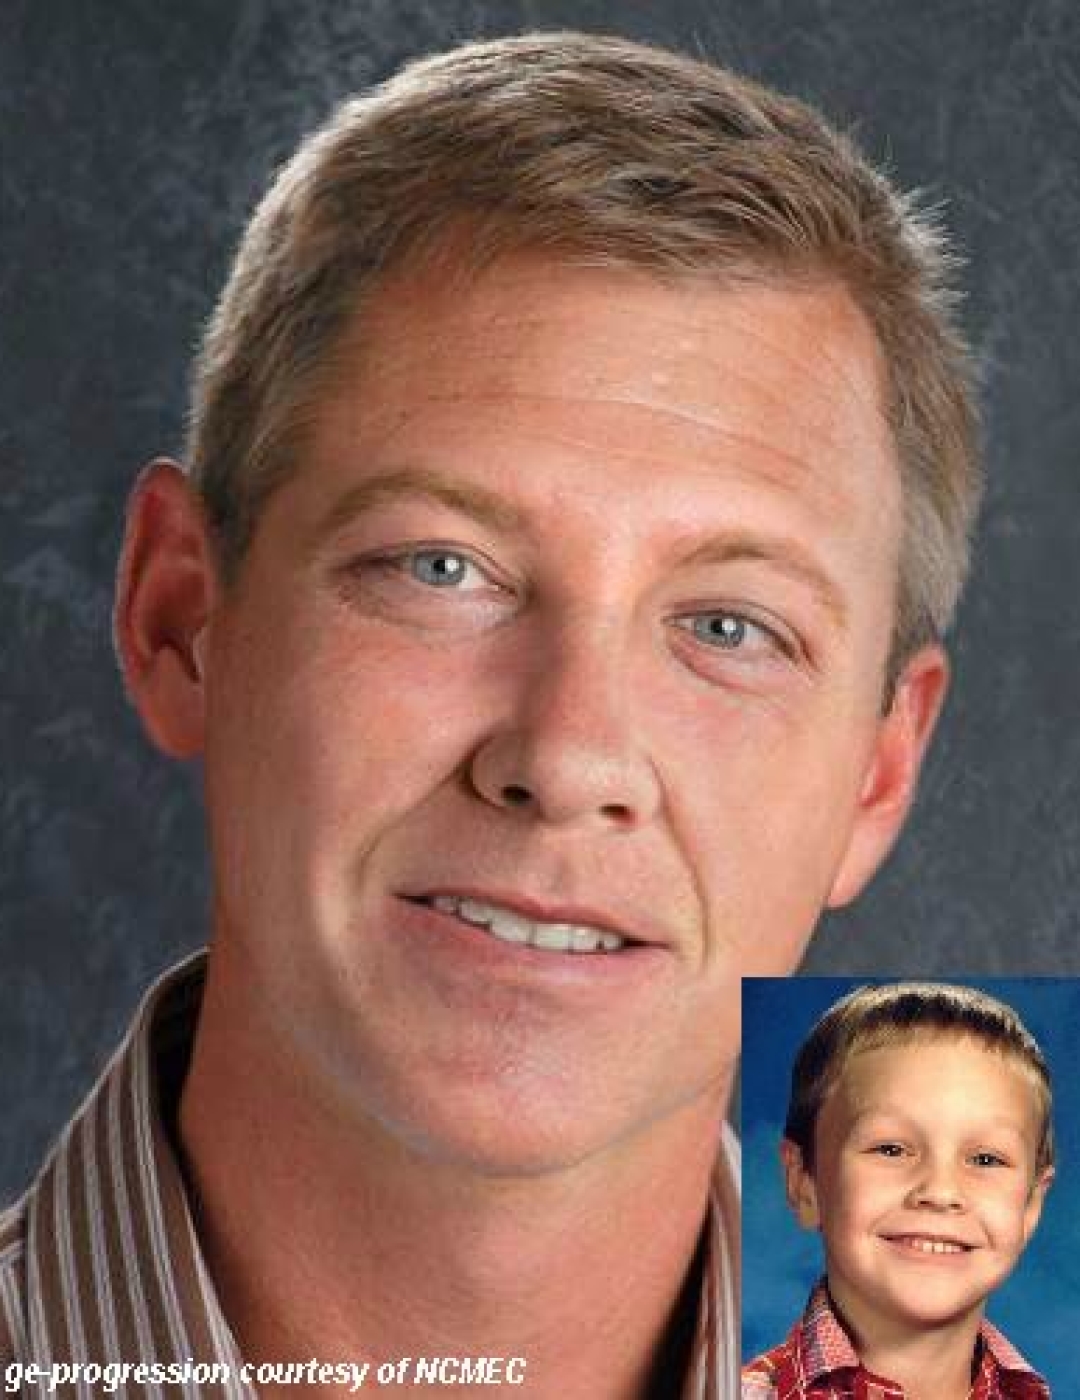 David Borer. Missing child with blonde hair and blue eyes. Age progressed photo shows what David looks like at 36 years old: an adult man with short gray-blonde hair and blue eyes.